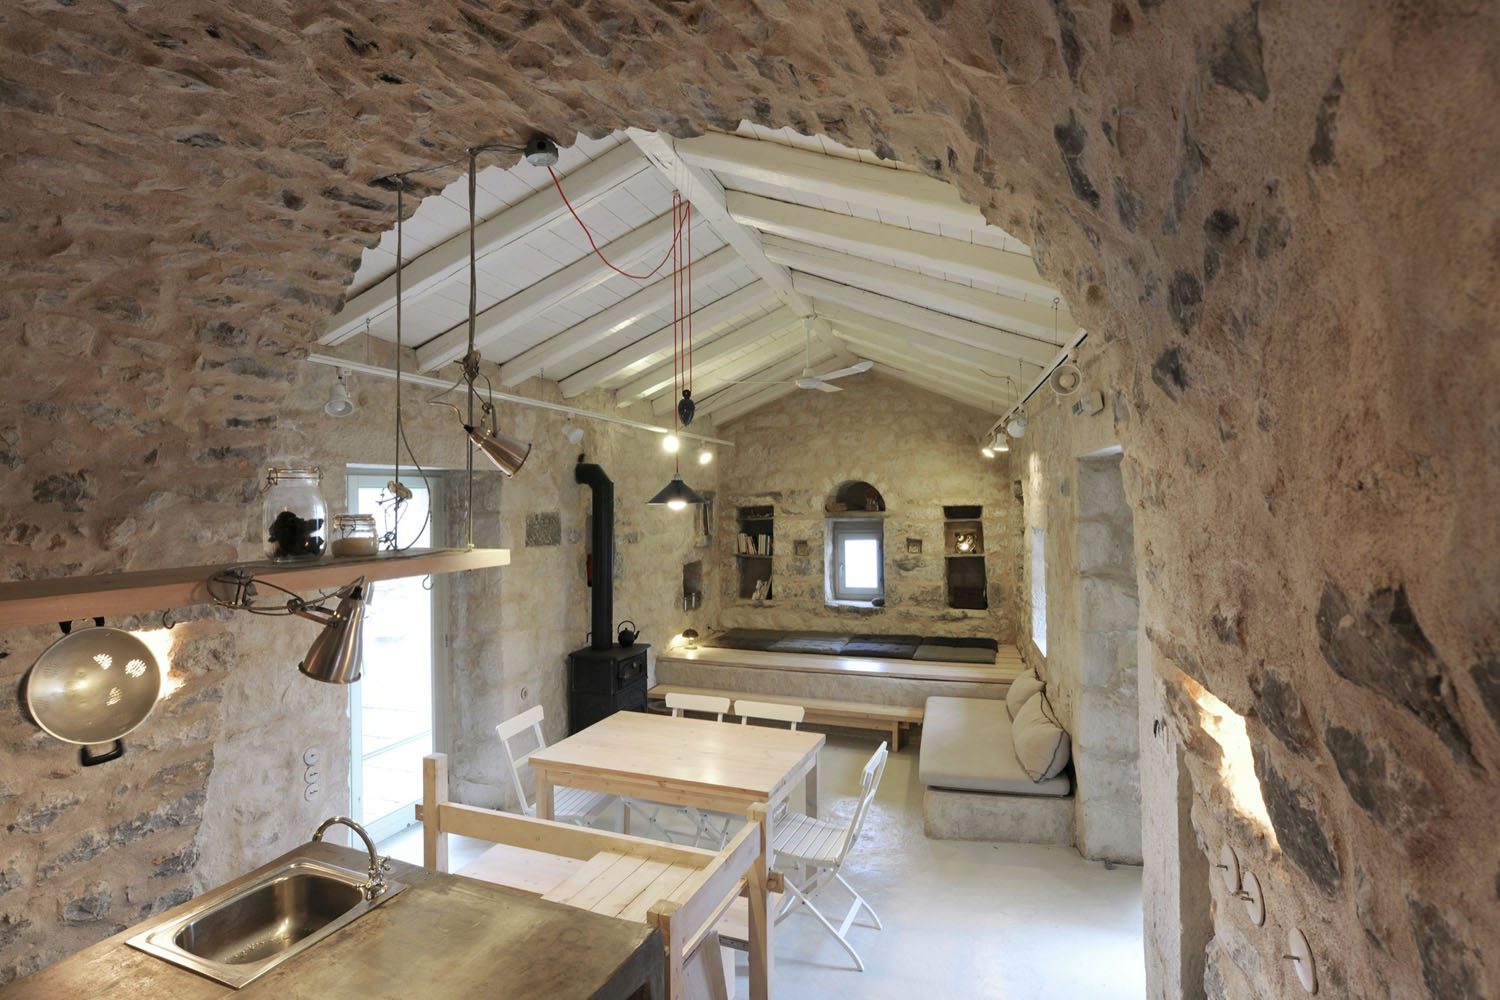 Historical Stone Building In Greece Transformed Into Contemporary ...